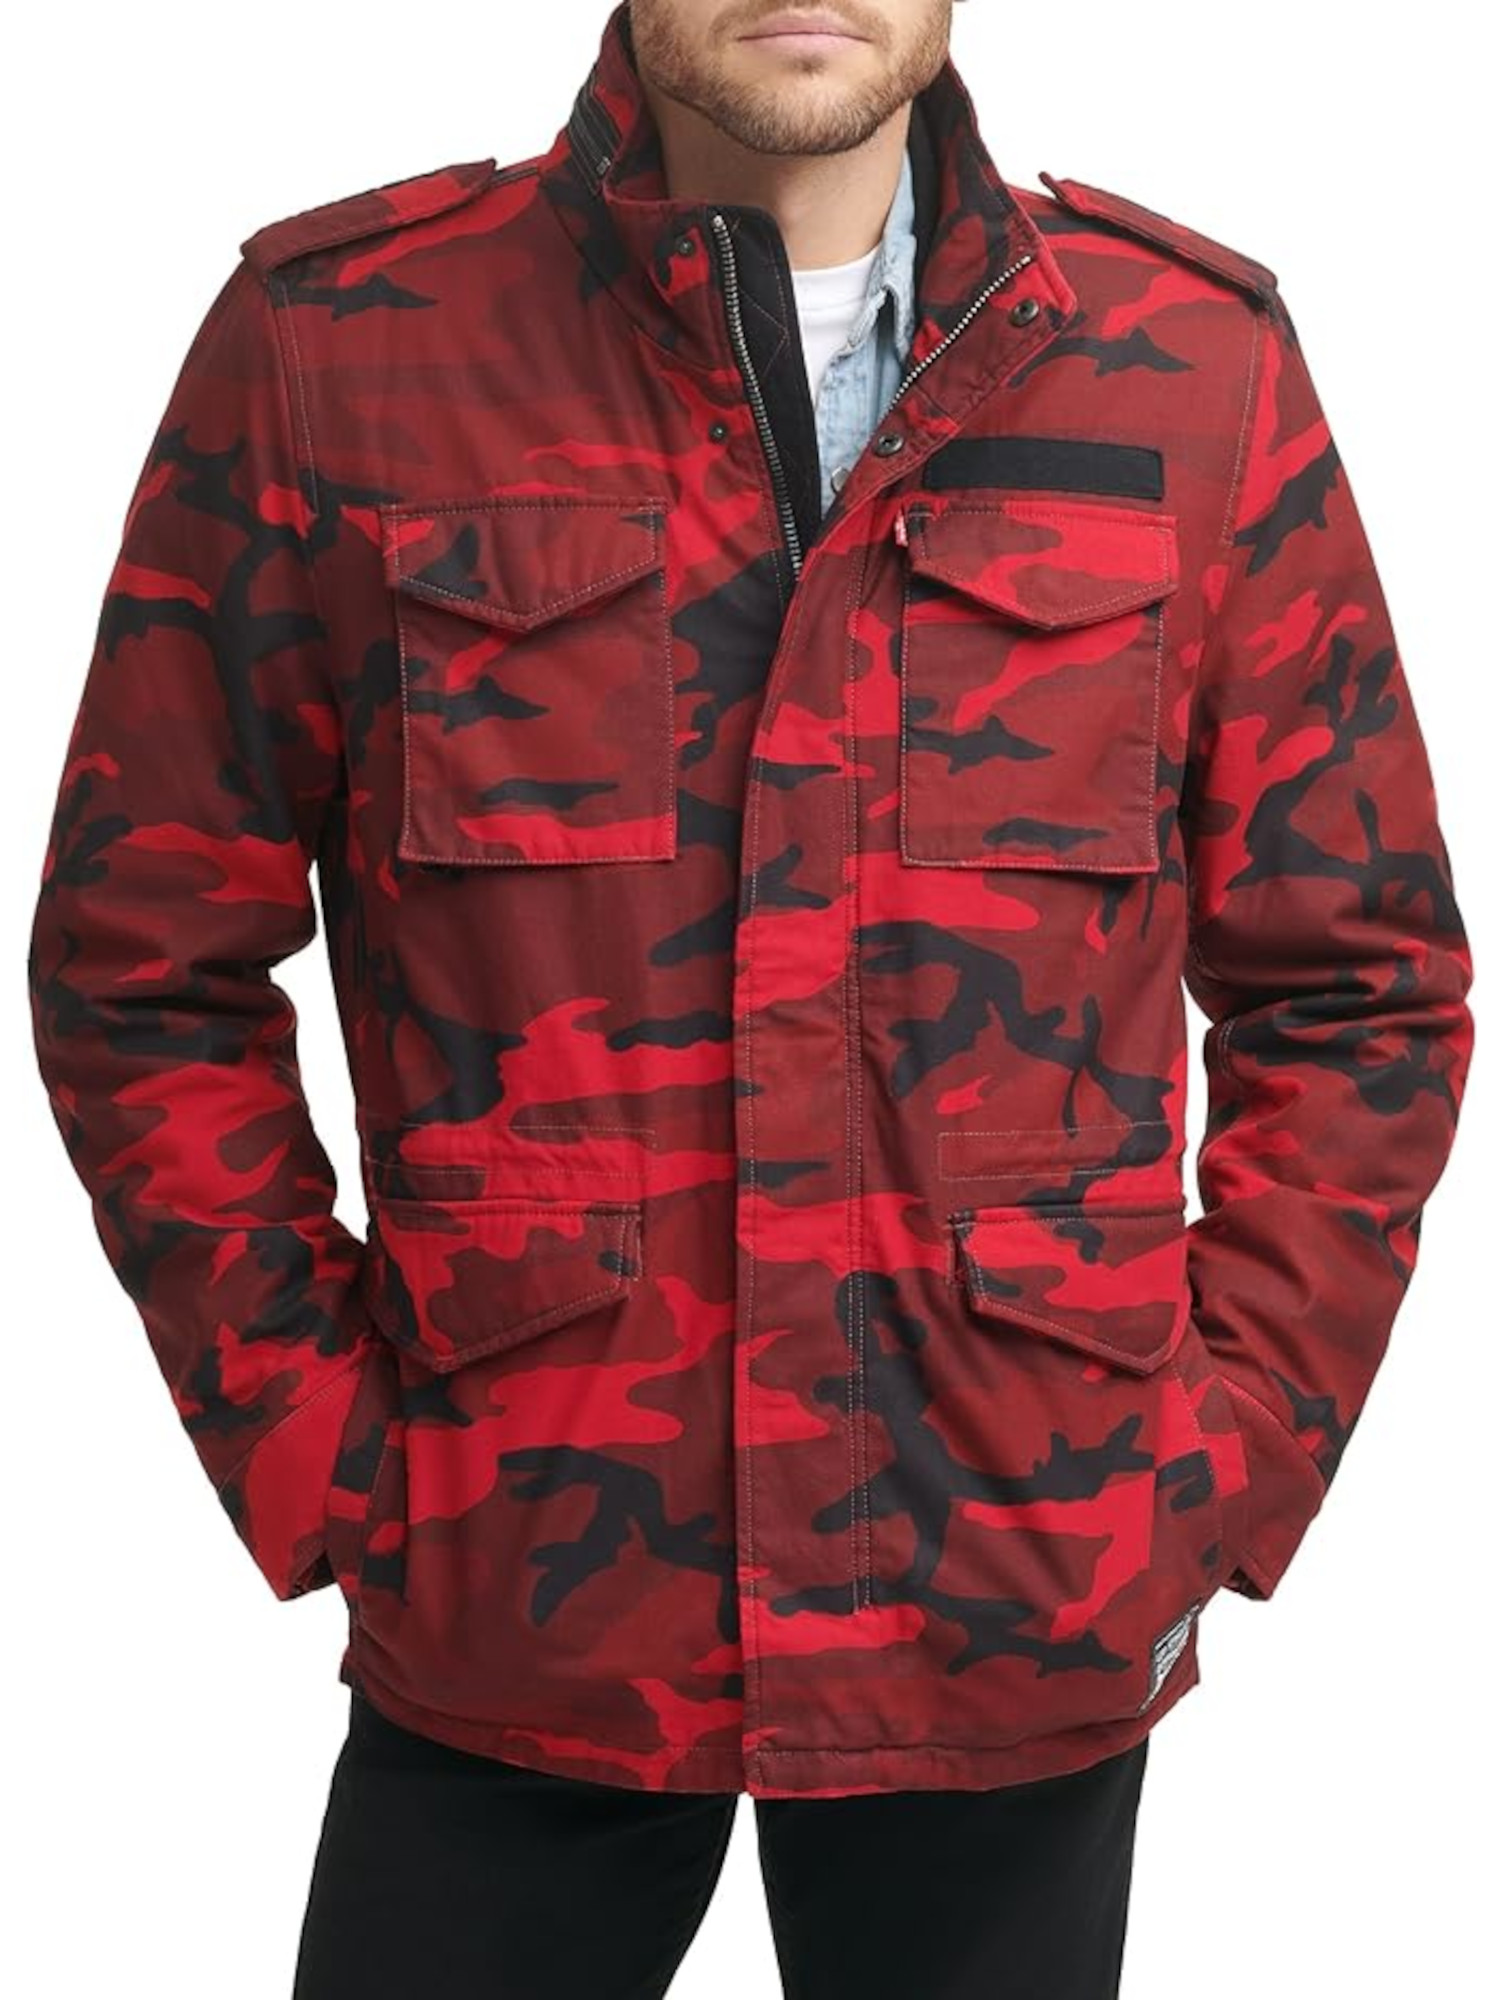 LEVI STRAUSS & CO Mens Red Faux Sherpa Lining, Camouflage Military Jacket XL